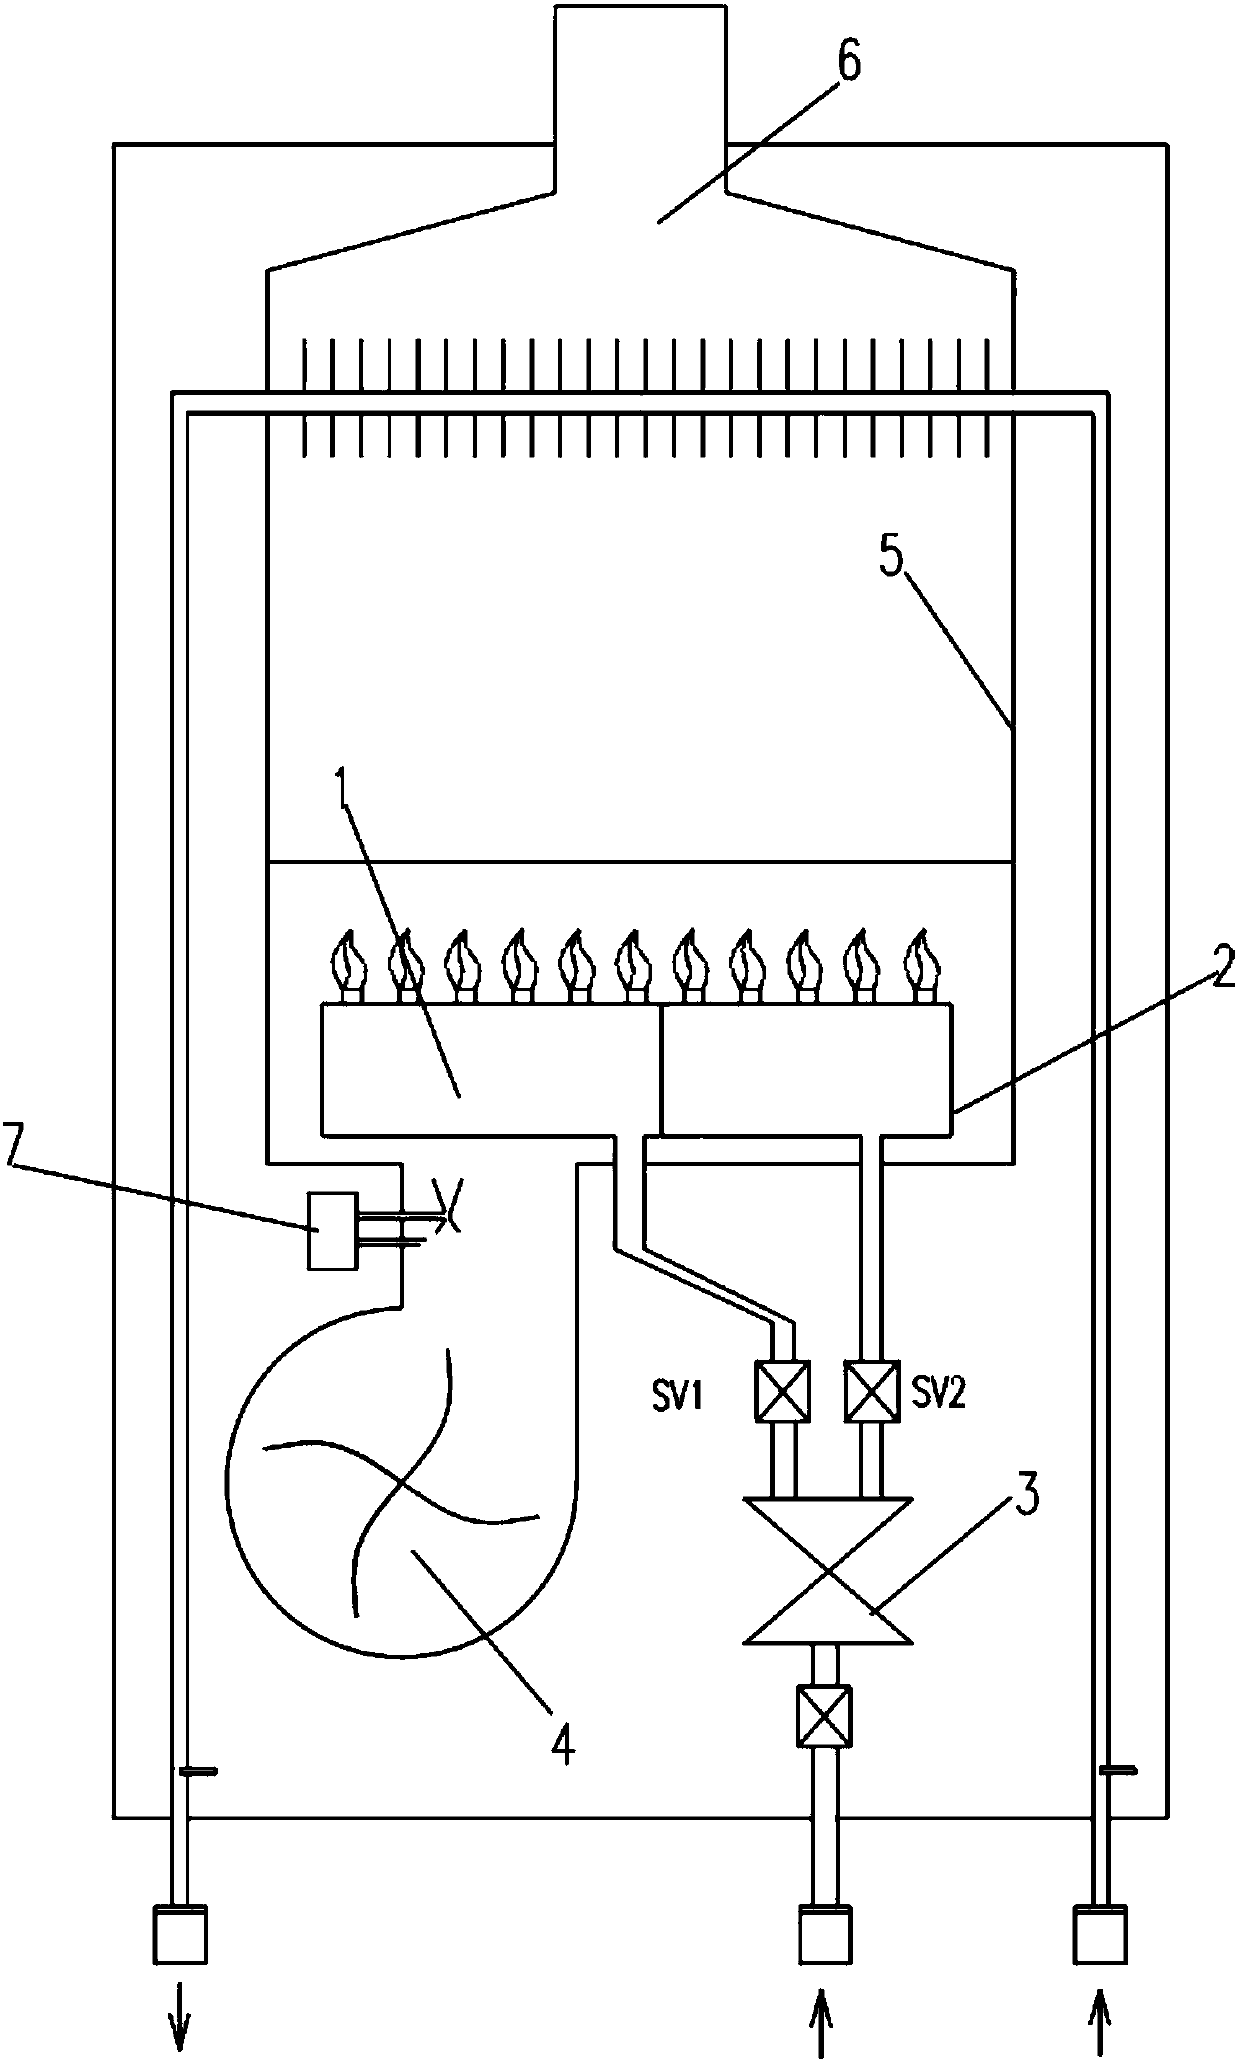 Combustion control method for gas water heater